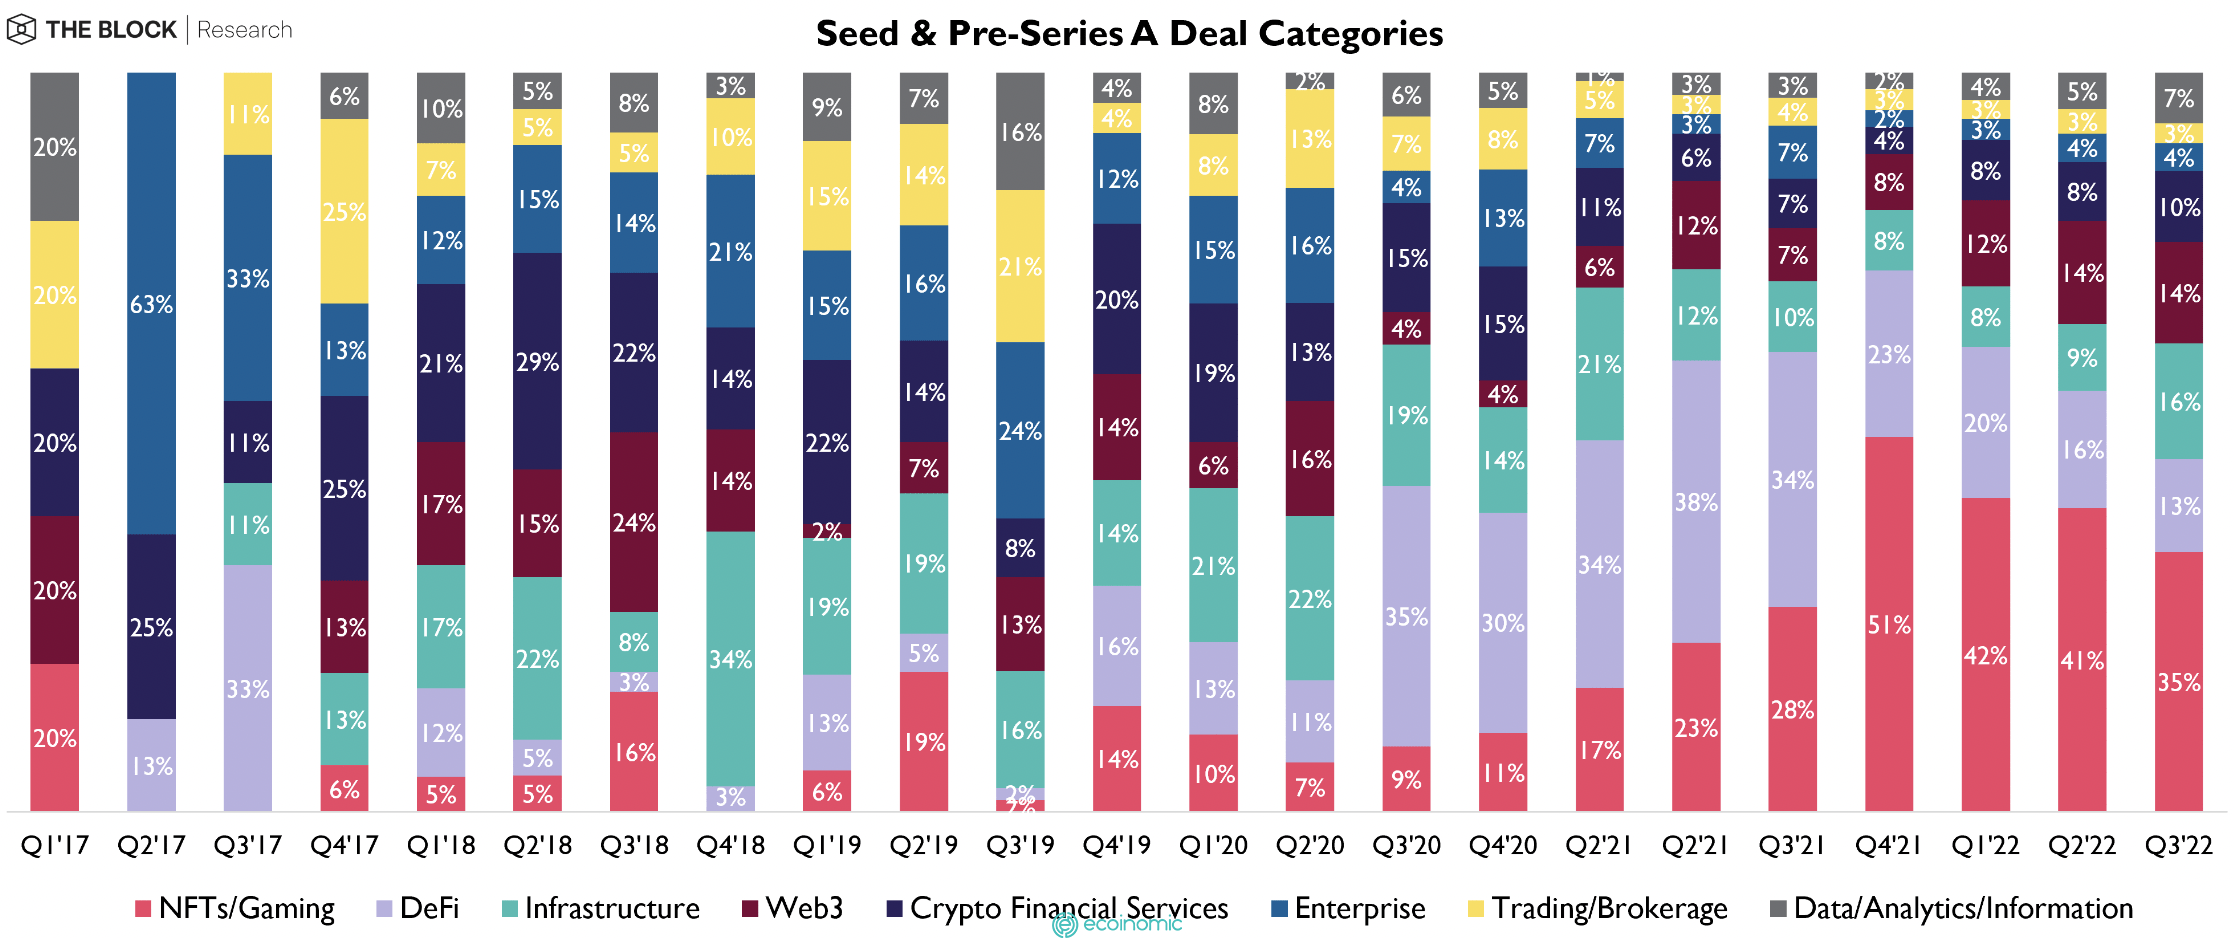 Seed & Pre-Series A Deal Categories